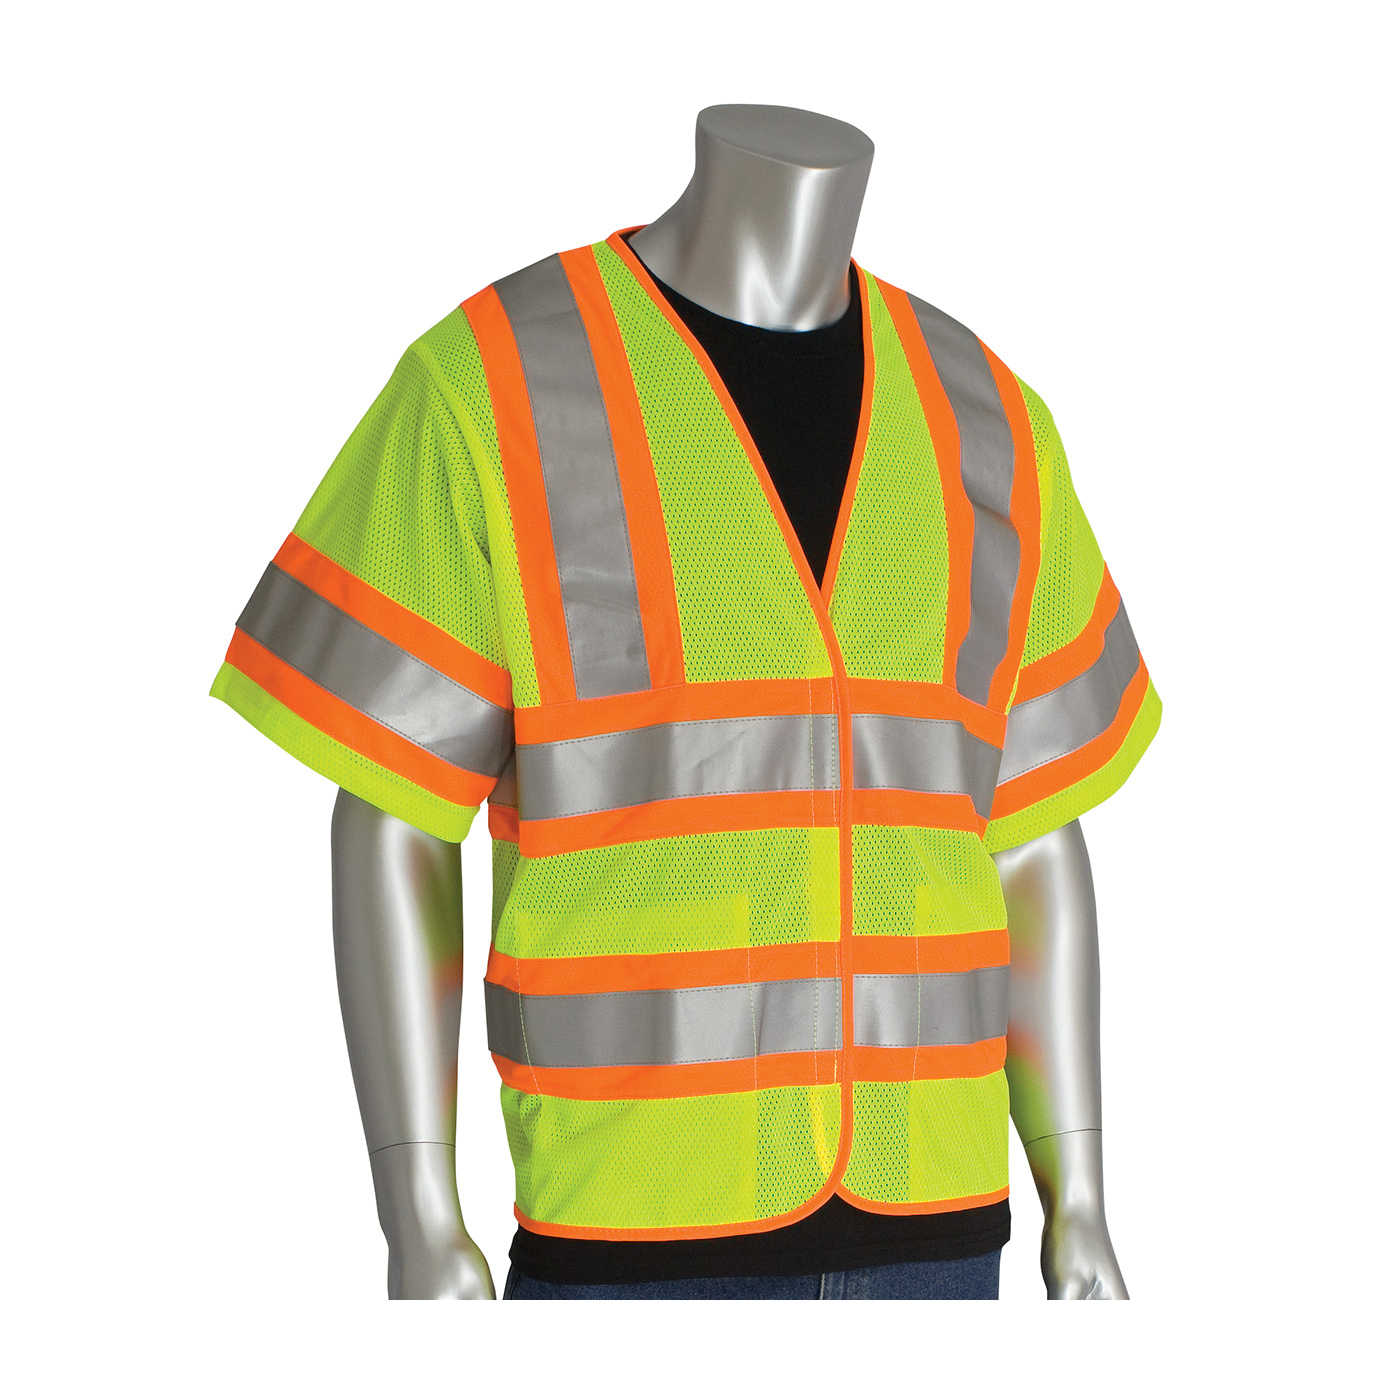 PIP® SafetyGear 305-HSVPFRLY-L/XL 2-Tone FR Treated Safety Vest, L to XL, Hi-Viz Yellow, Polyester, Hook and Loop Closure, 2 Pockets, ANSI Class: Class 3, ANSI Specified